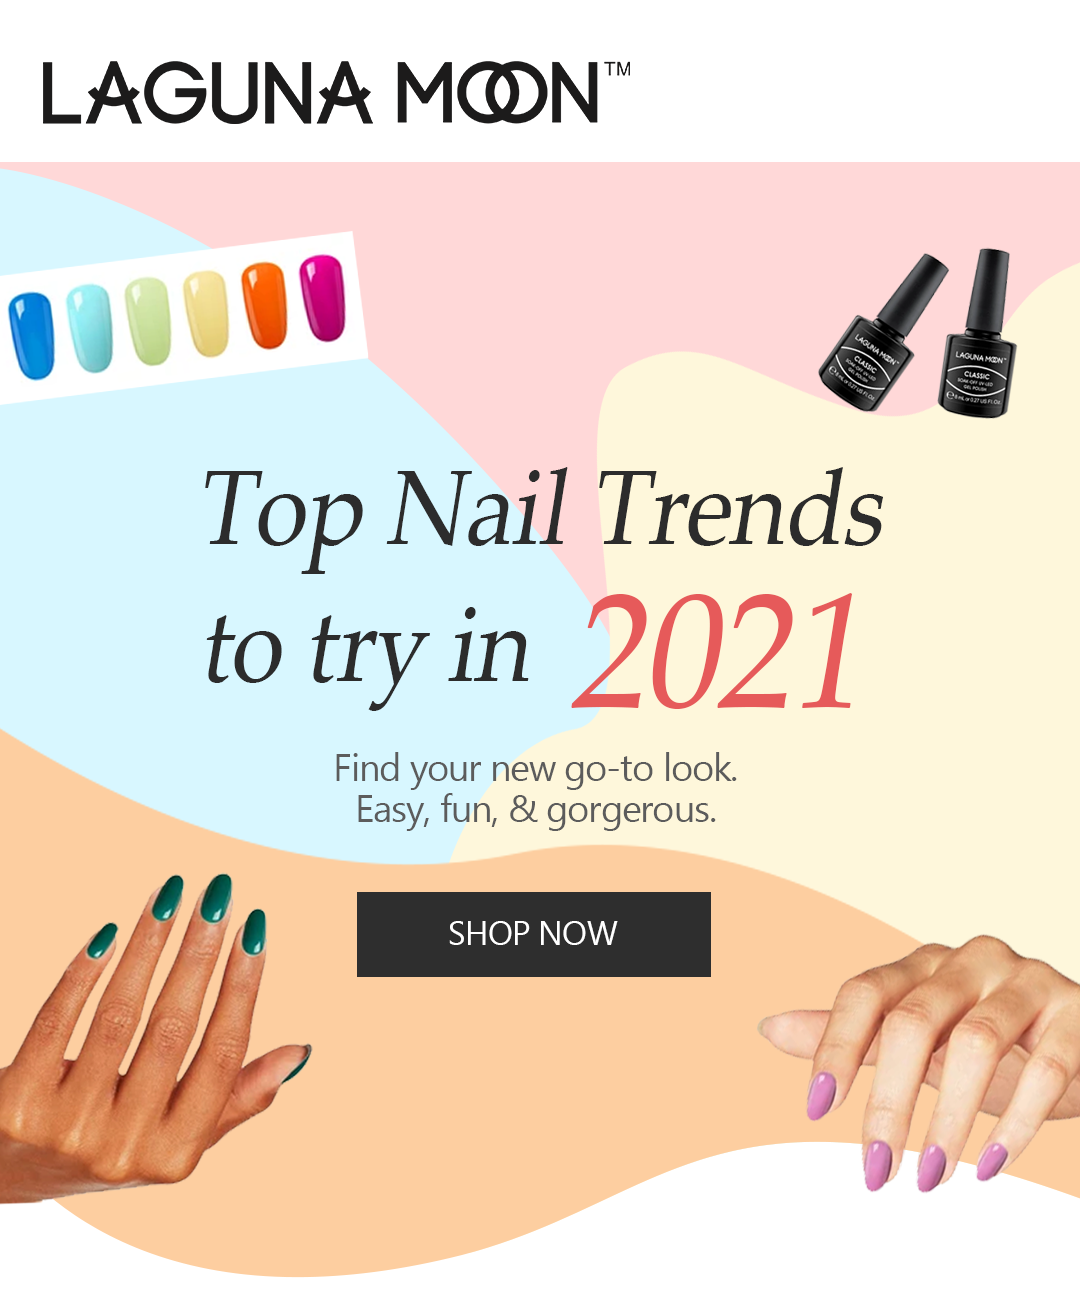 Top Nail Trends to try in 2021!